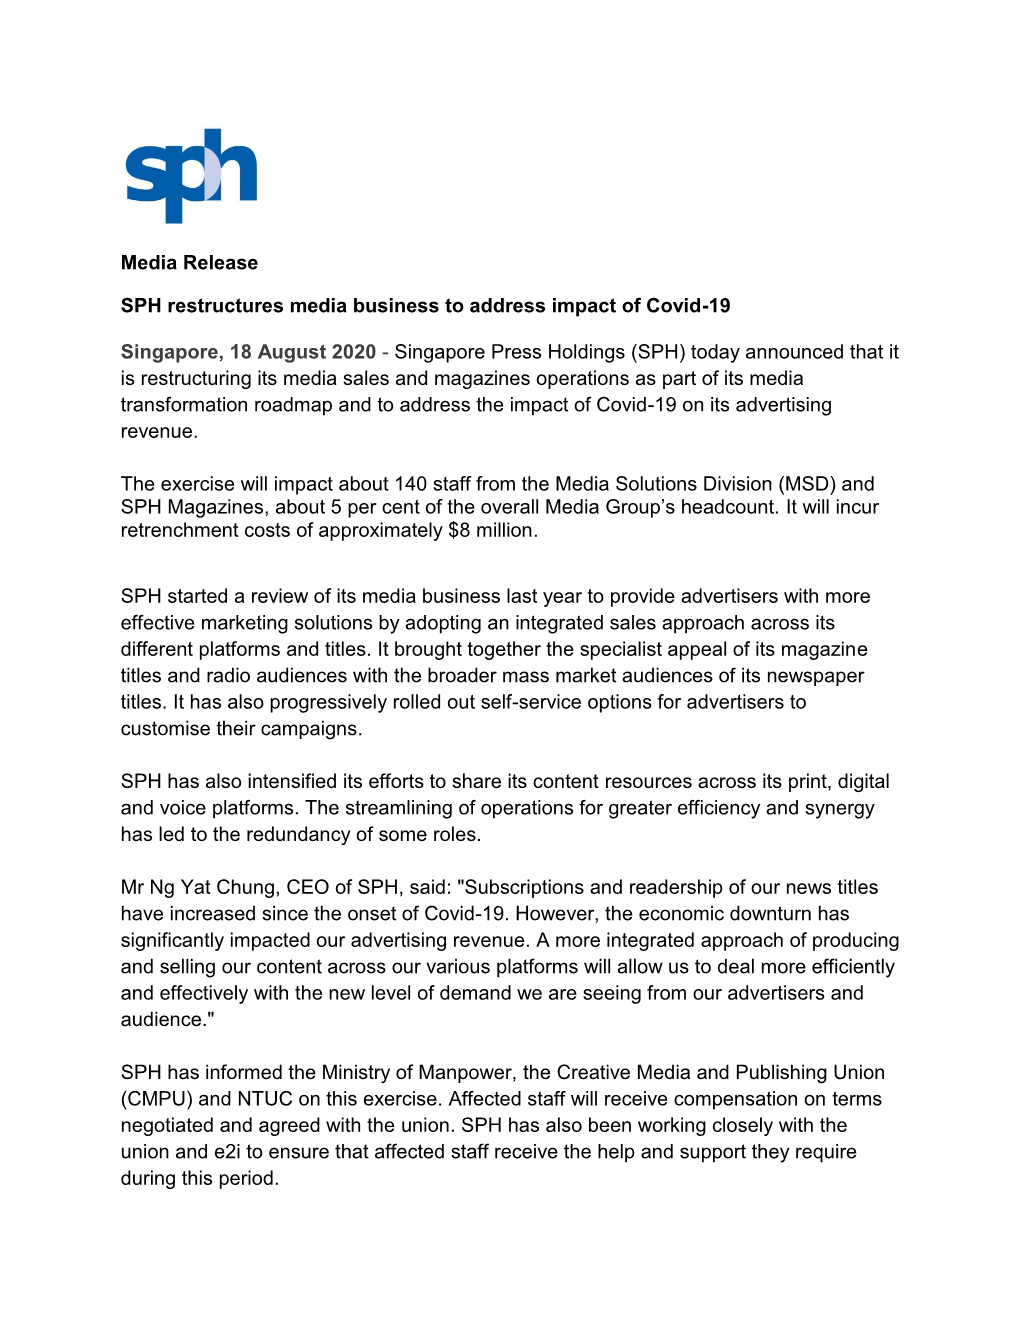 Media Release SPH Restructures Media Business to Address Impact